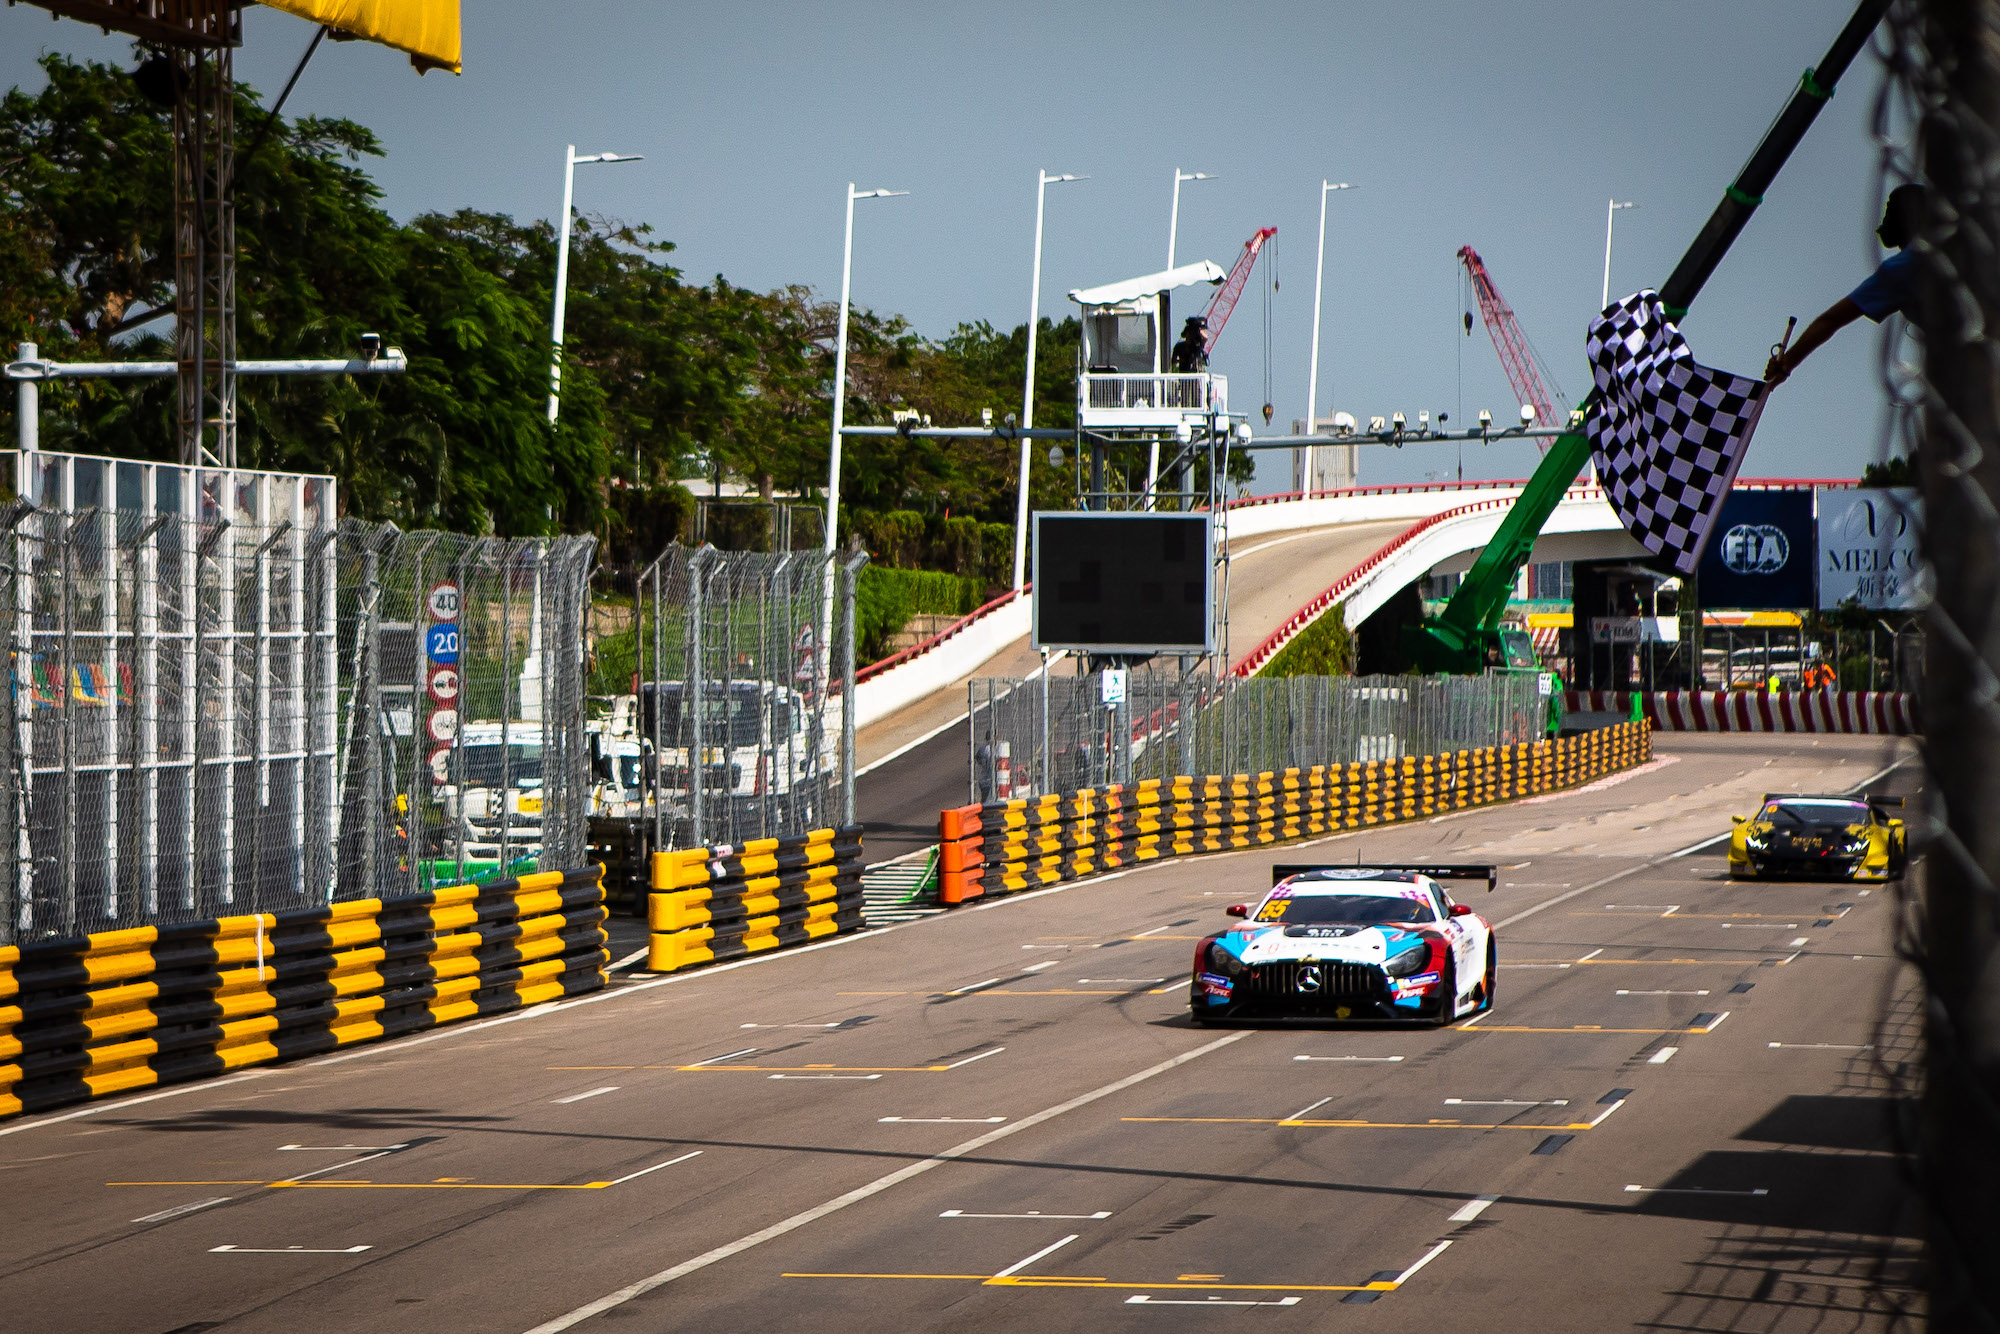 Darryl O’Young gets the chequered flag as Ling Kang comes in second